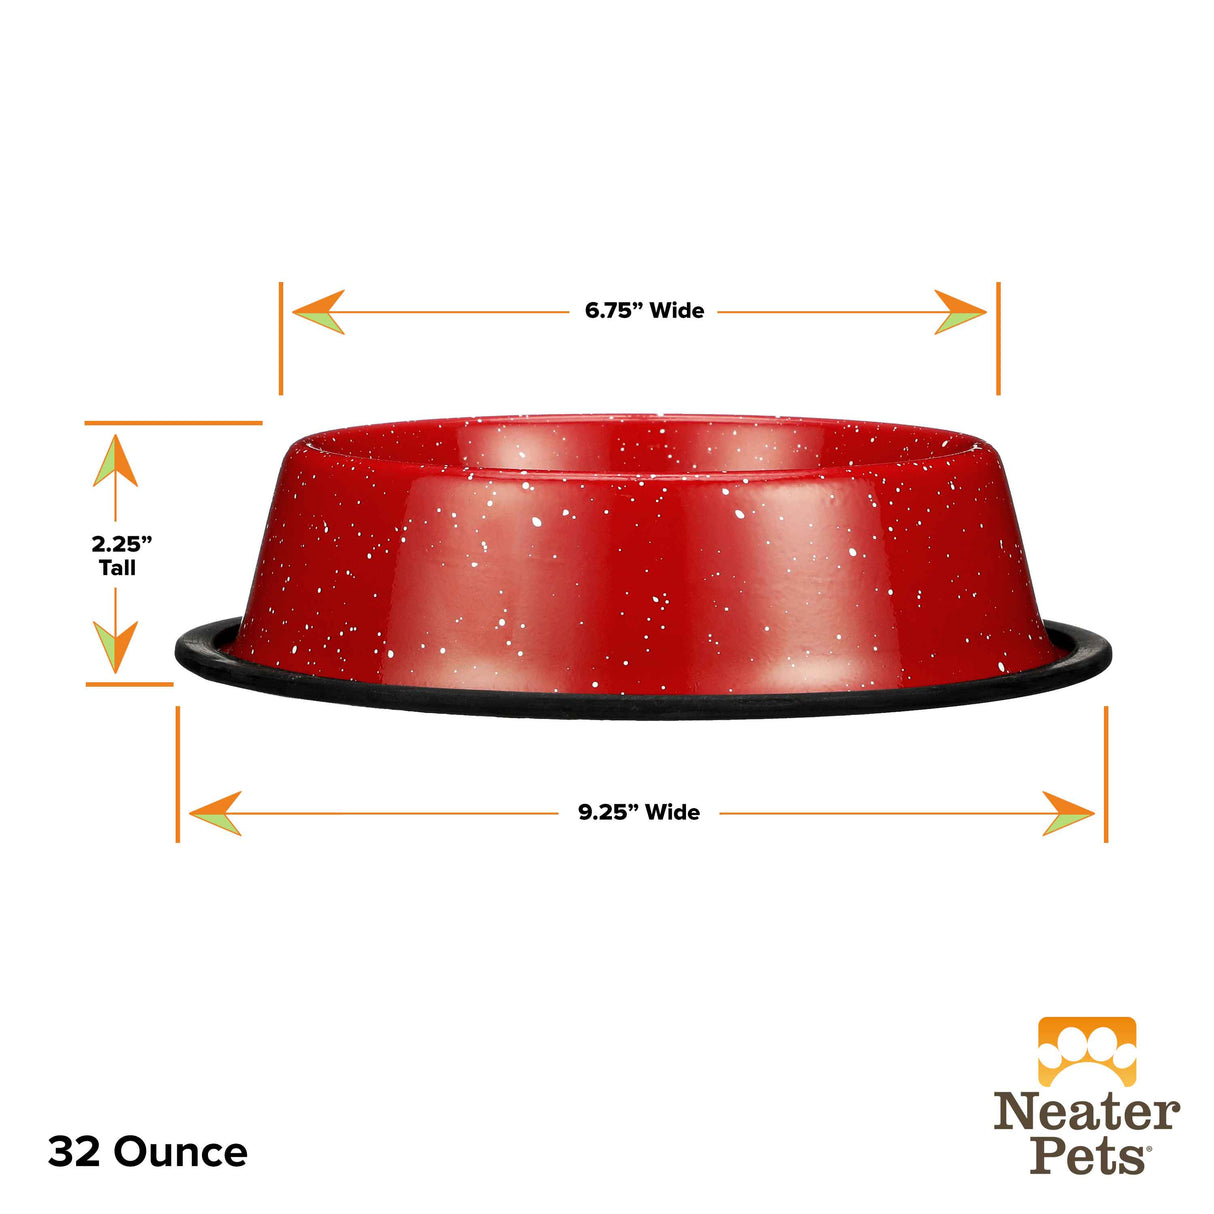 32 ounce Red Camping Bowl sizing guide